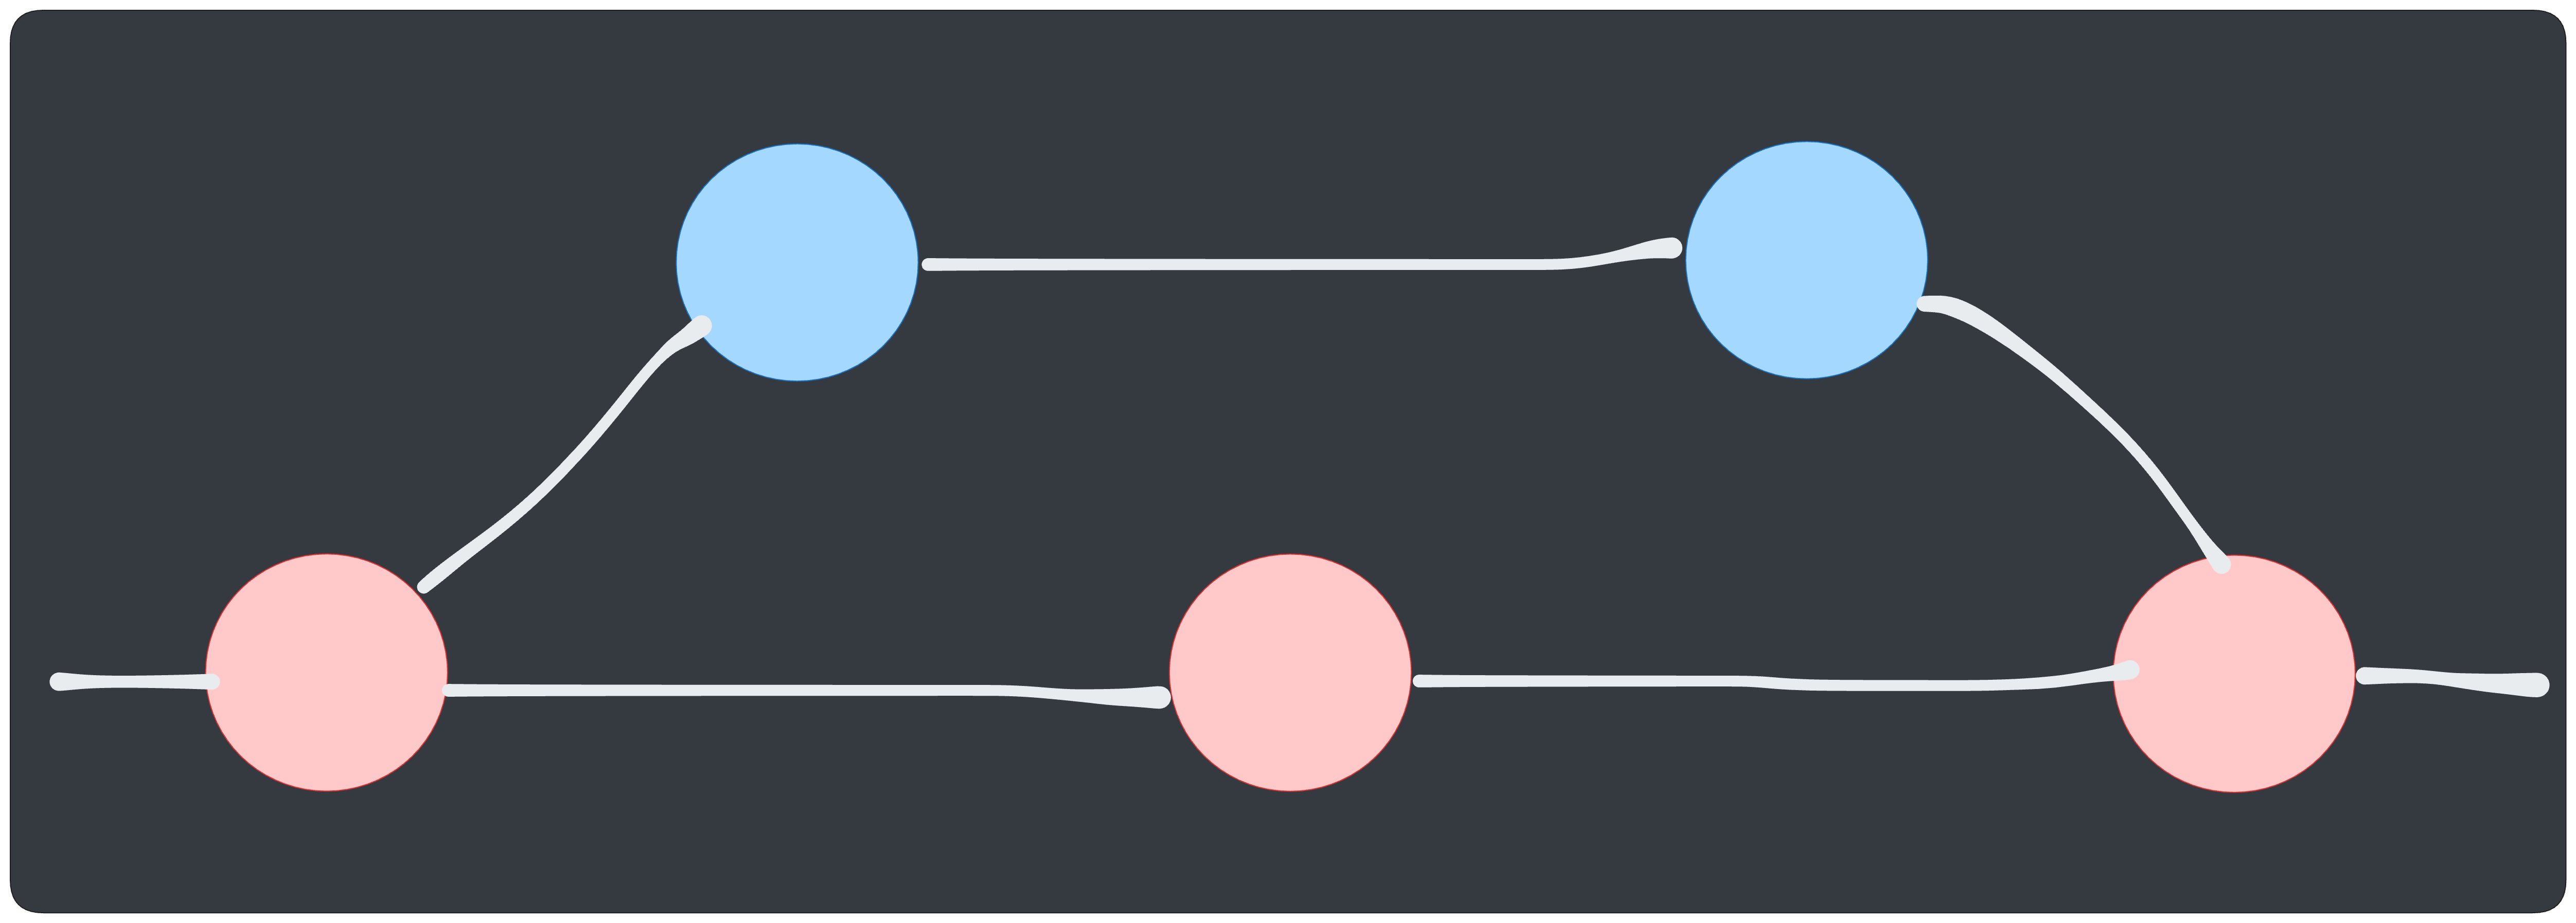 A facsimile of a git versioning branches graph